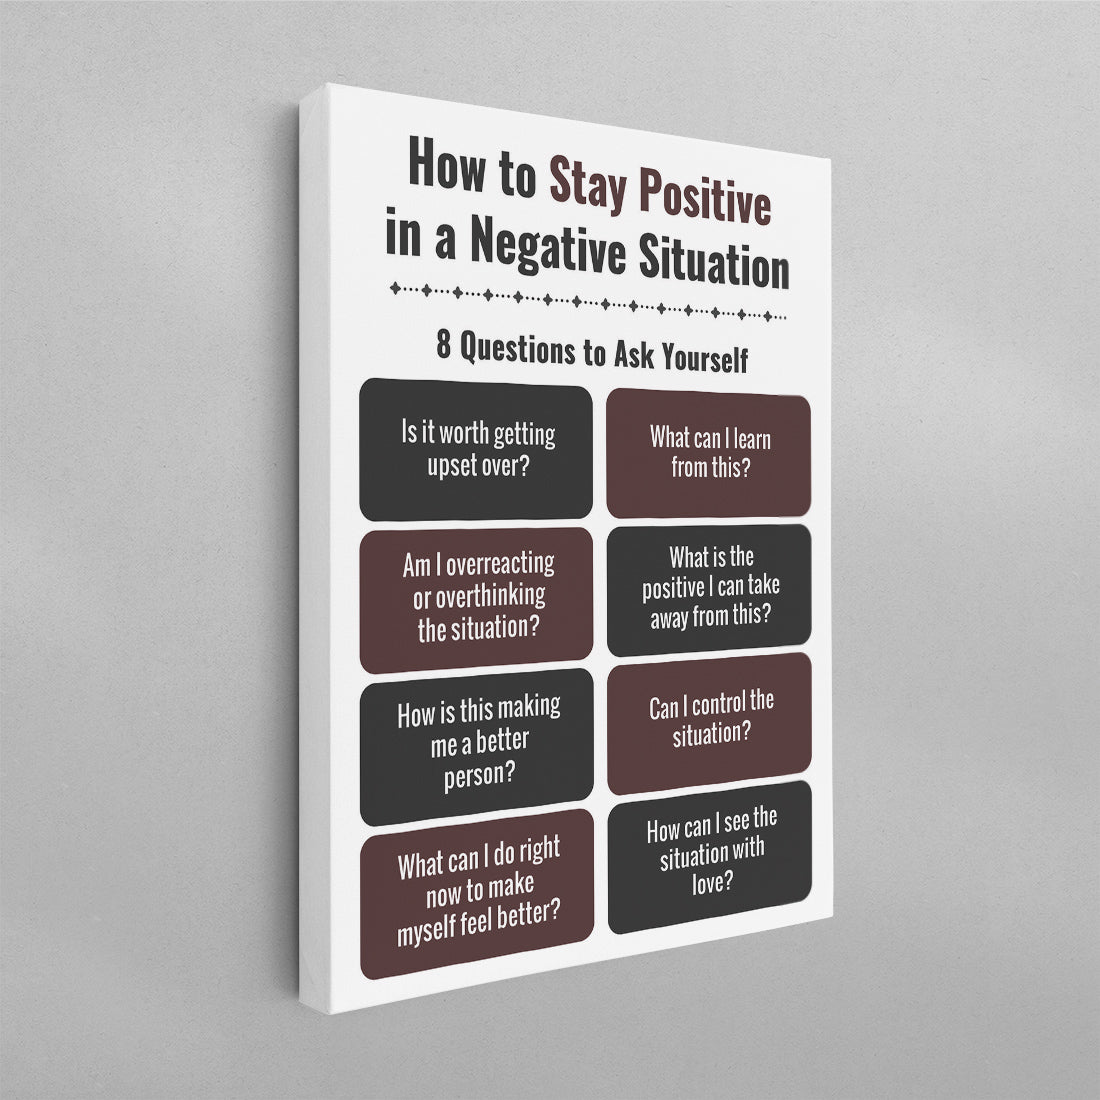 How To Stay Positive In a Negative Situation